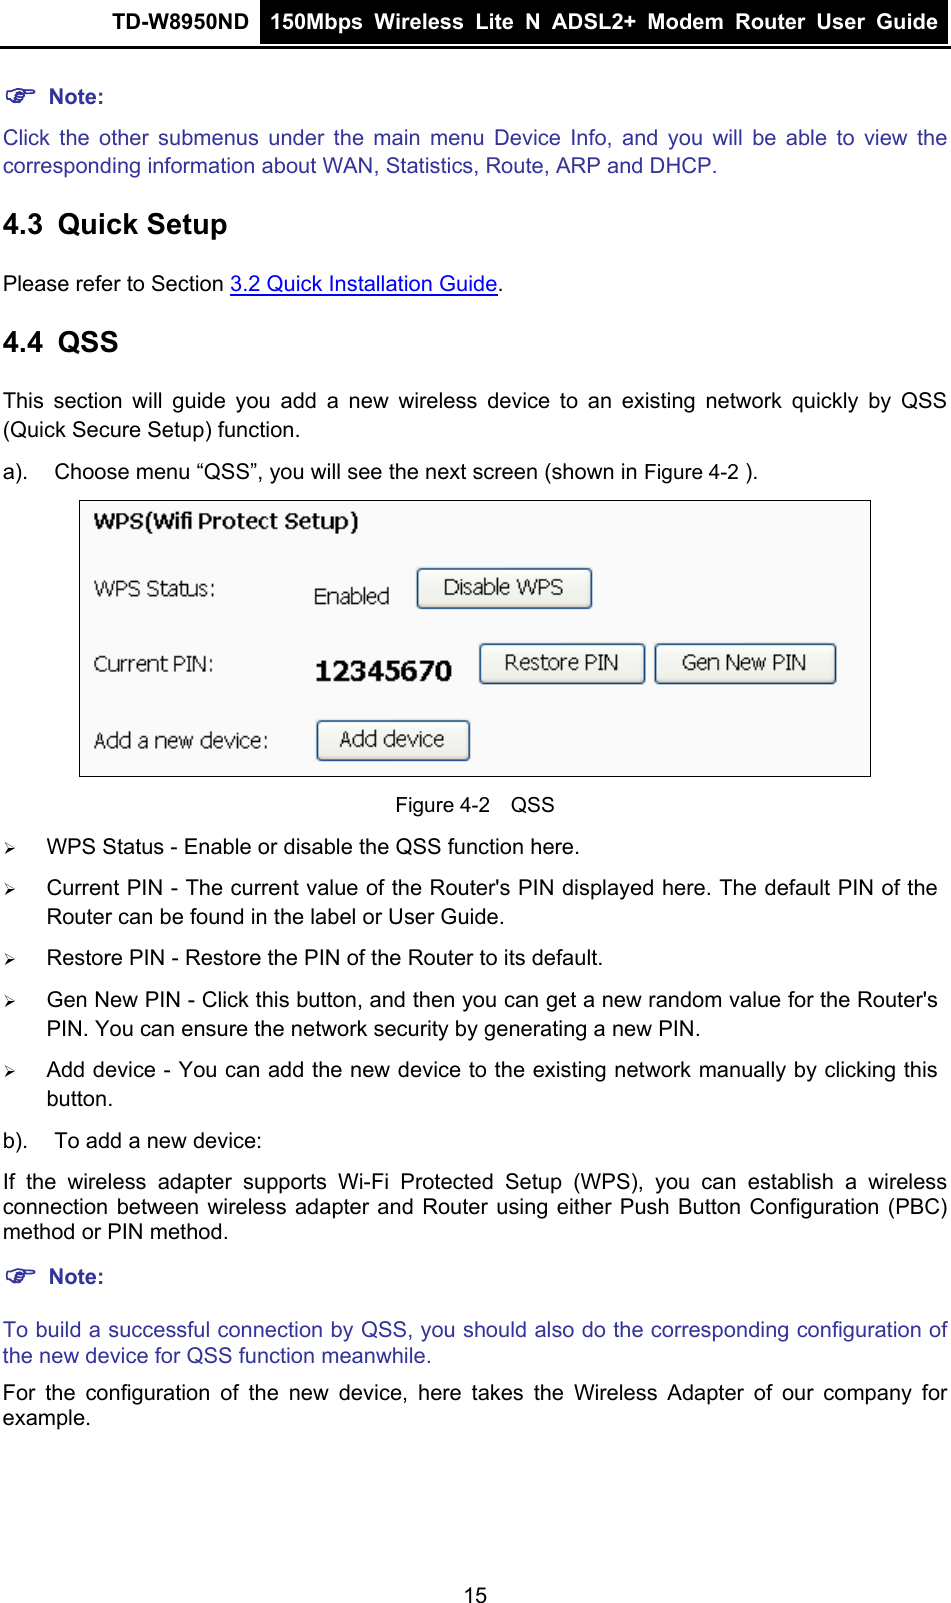 TD-W8950ND  150Mbps Wireless Lite N ADSL2+ Modem Router User Guide  ) Note: Click the other submenus under the main menu Device Info, and you will be able to view the corresponding information about WAN, Statistics, Route, ARP and DHCP. 4.3  Quick Setup Please refer to Section 3.2 Quick Installation Guide. 4.4  QSS This section will guide you add a new wireless device to an existing network quickly by QSS (Quick Secure Setup) function.   a).  Choose menu “QSS”, you will see the next screen (shown in Figure 4-2 ).  Figure 4-2    QSS ¾ WPS Status - Enable or disable the QSS function here.   ¾ Current PIN - The current value of the Router&apos;s PIN displayed here. The default PIN of the Router can be found in the label or User Guide.   ¾ Restore PIN - Restore the PIN of the Router to its default.   ¾ Gen New PIN - Click this button, and then you can get a new random value for the Router&apos;s PIN. You can ensure the network security by generating a new PIN.   ¾ Add device - You can add the new device to the existing network manually by clicking this button.  b).  To add a new device: If the wireless adapter supports Wi-Fi Protected Setup (WPS), you can establish a wireless connection between wireless adapter and Router using either Push Button Configuration (PBC) method or PIN method. ) Note: To build a successful connection by QSS, you should also do the corresponding configuration of the new device for QSS function meanwhile. For the configuration of the new device, here takes the Wireless Adapter of our company for example. 15 